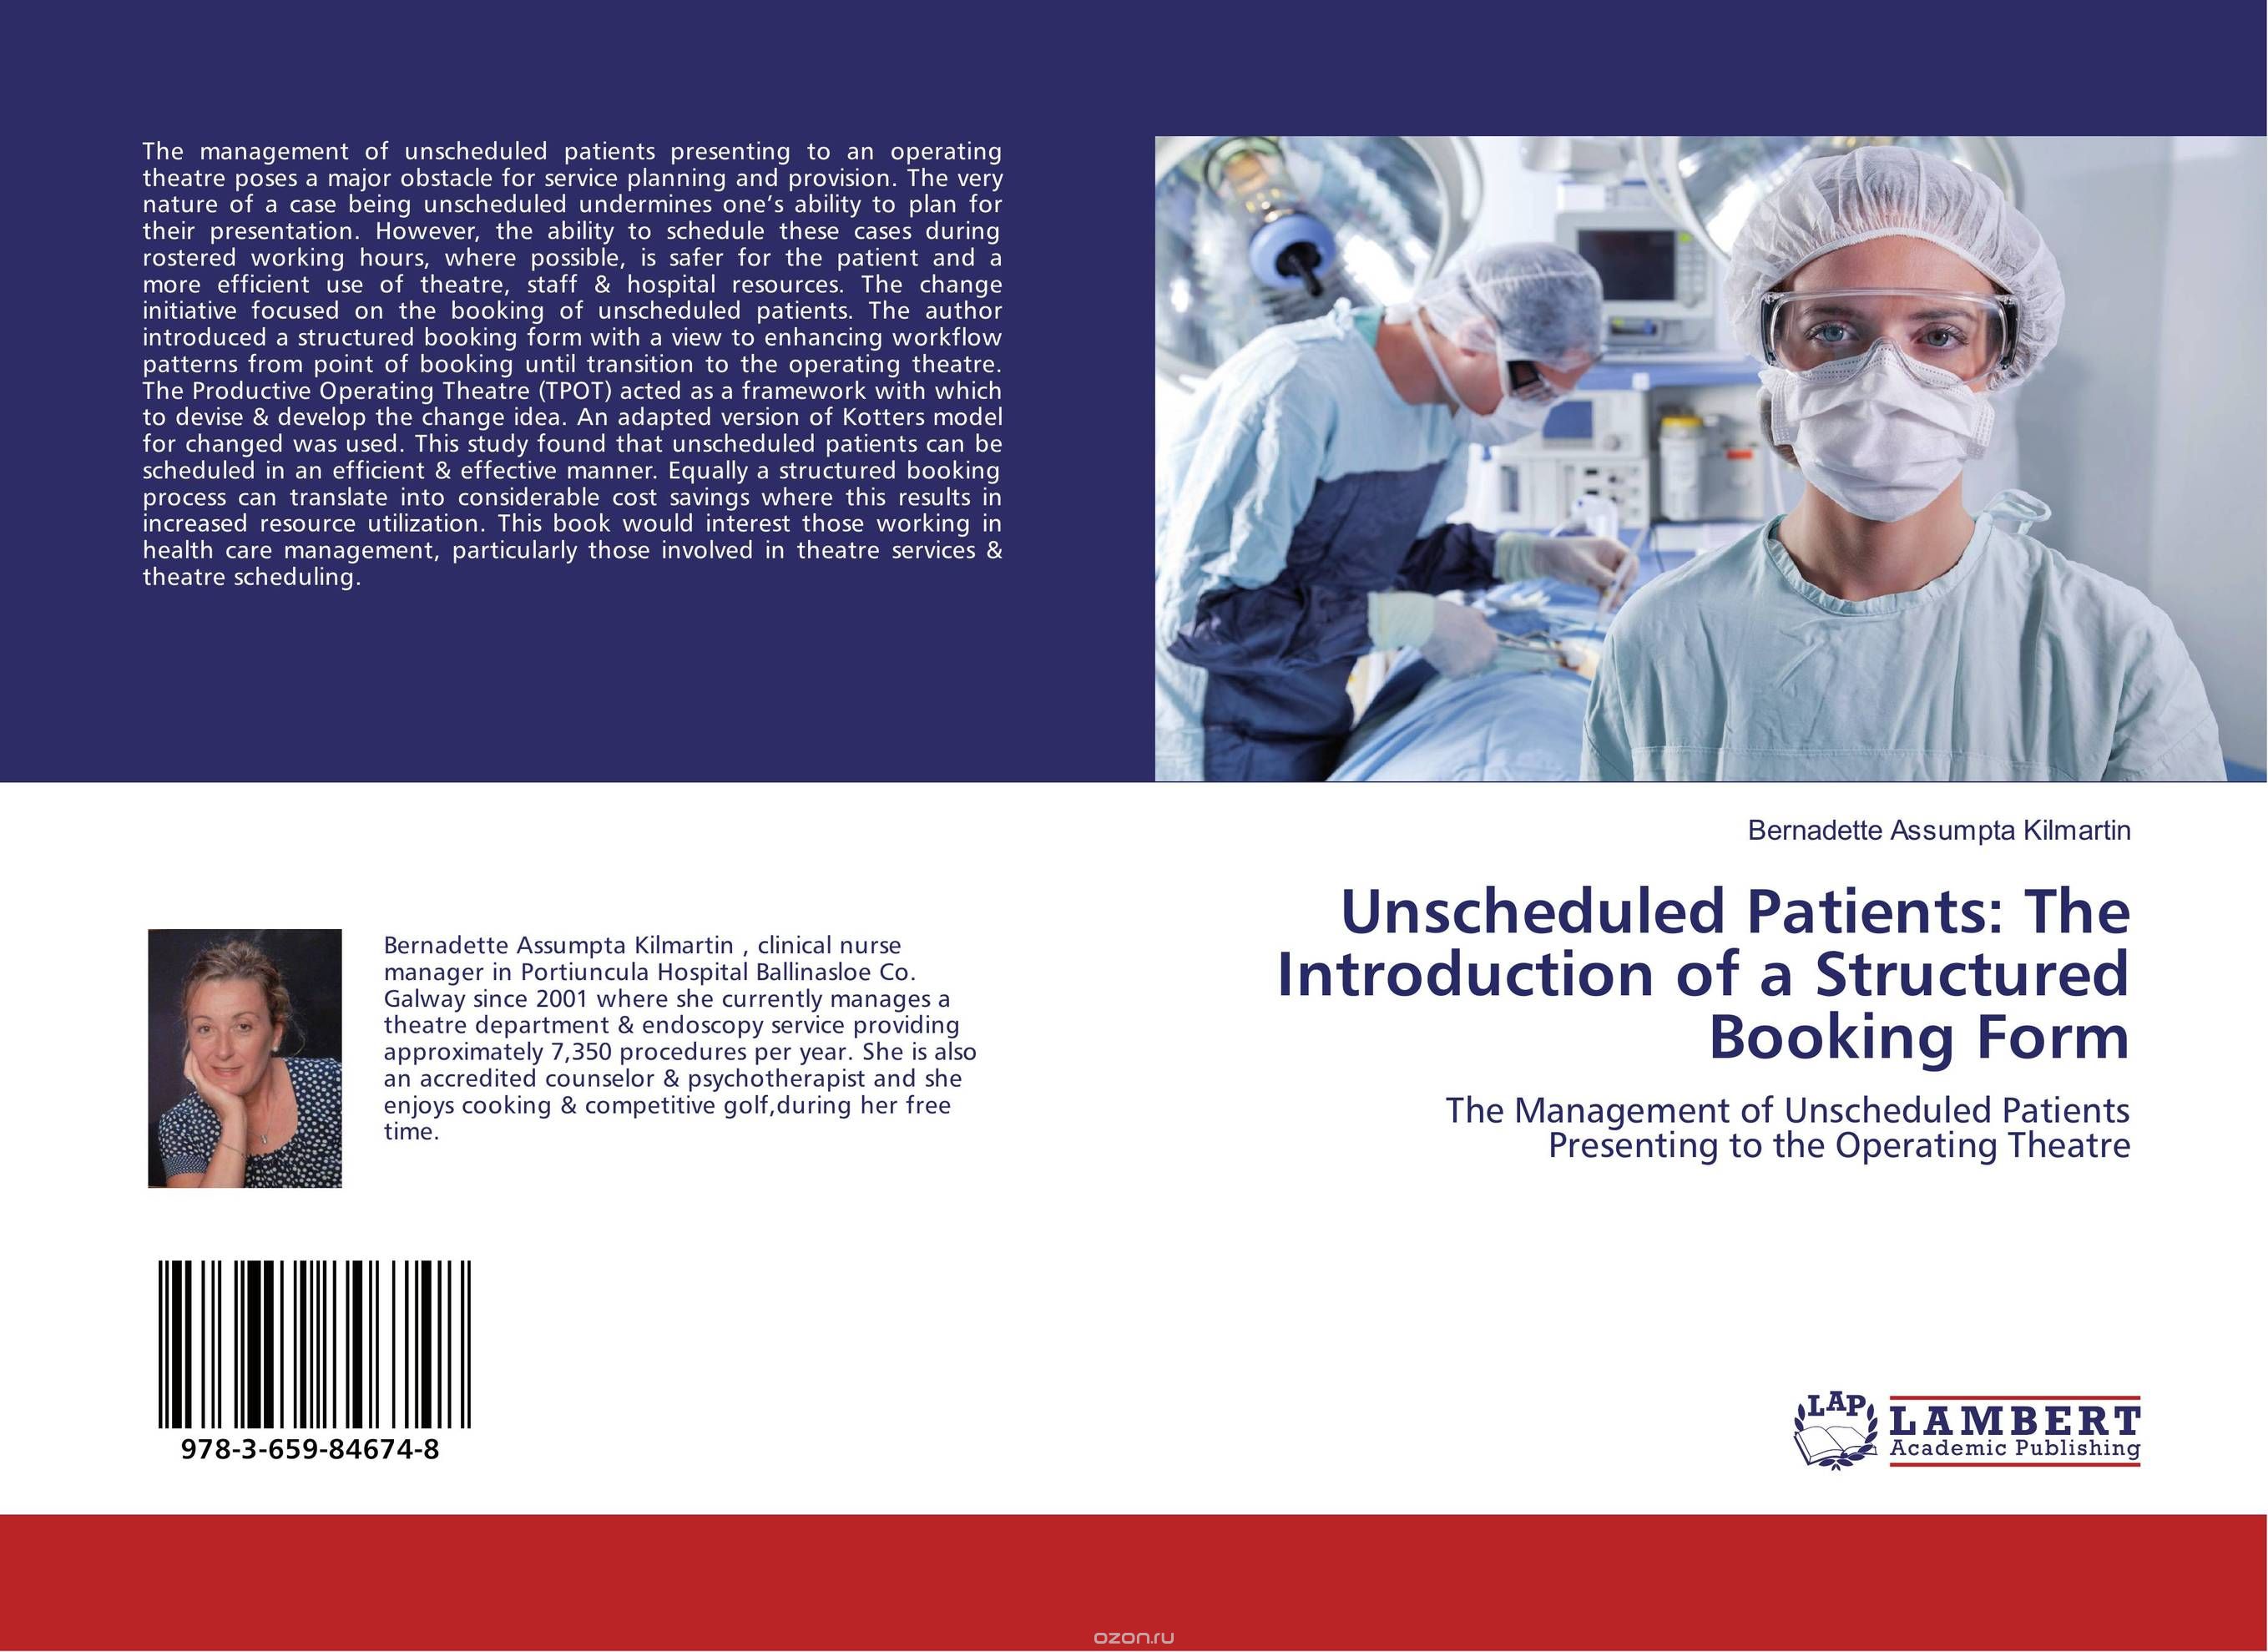 Скачать книгу "Unscheduled Patients: The Introduction of a Structured Booking Form"